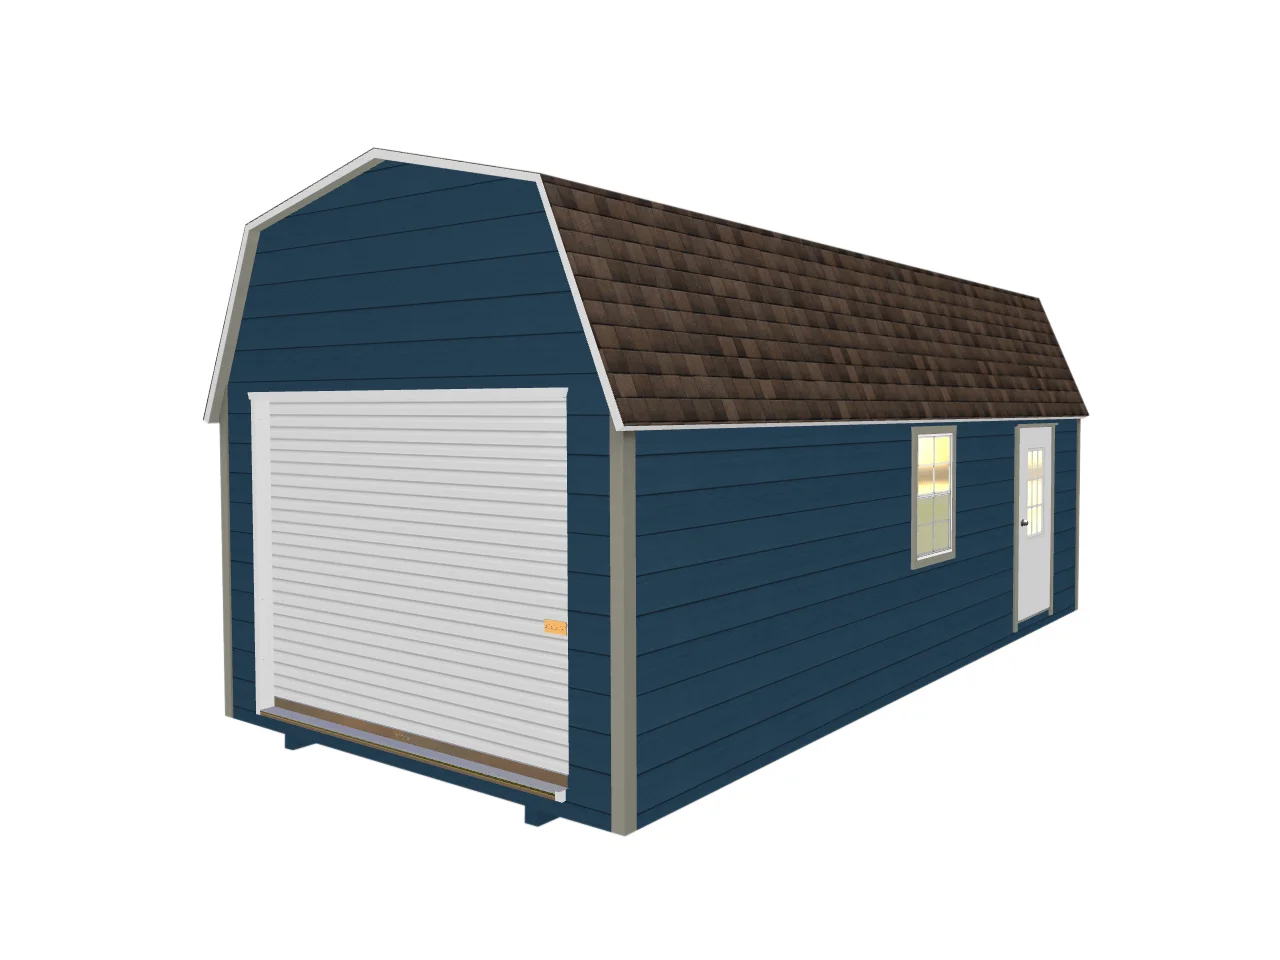 Nice blue lap siding garage shed with a garage door in the twelve foot end wall and window.